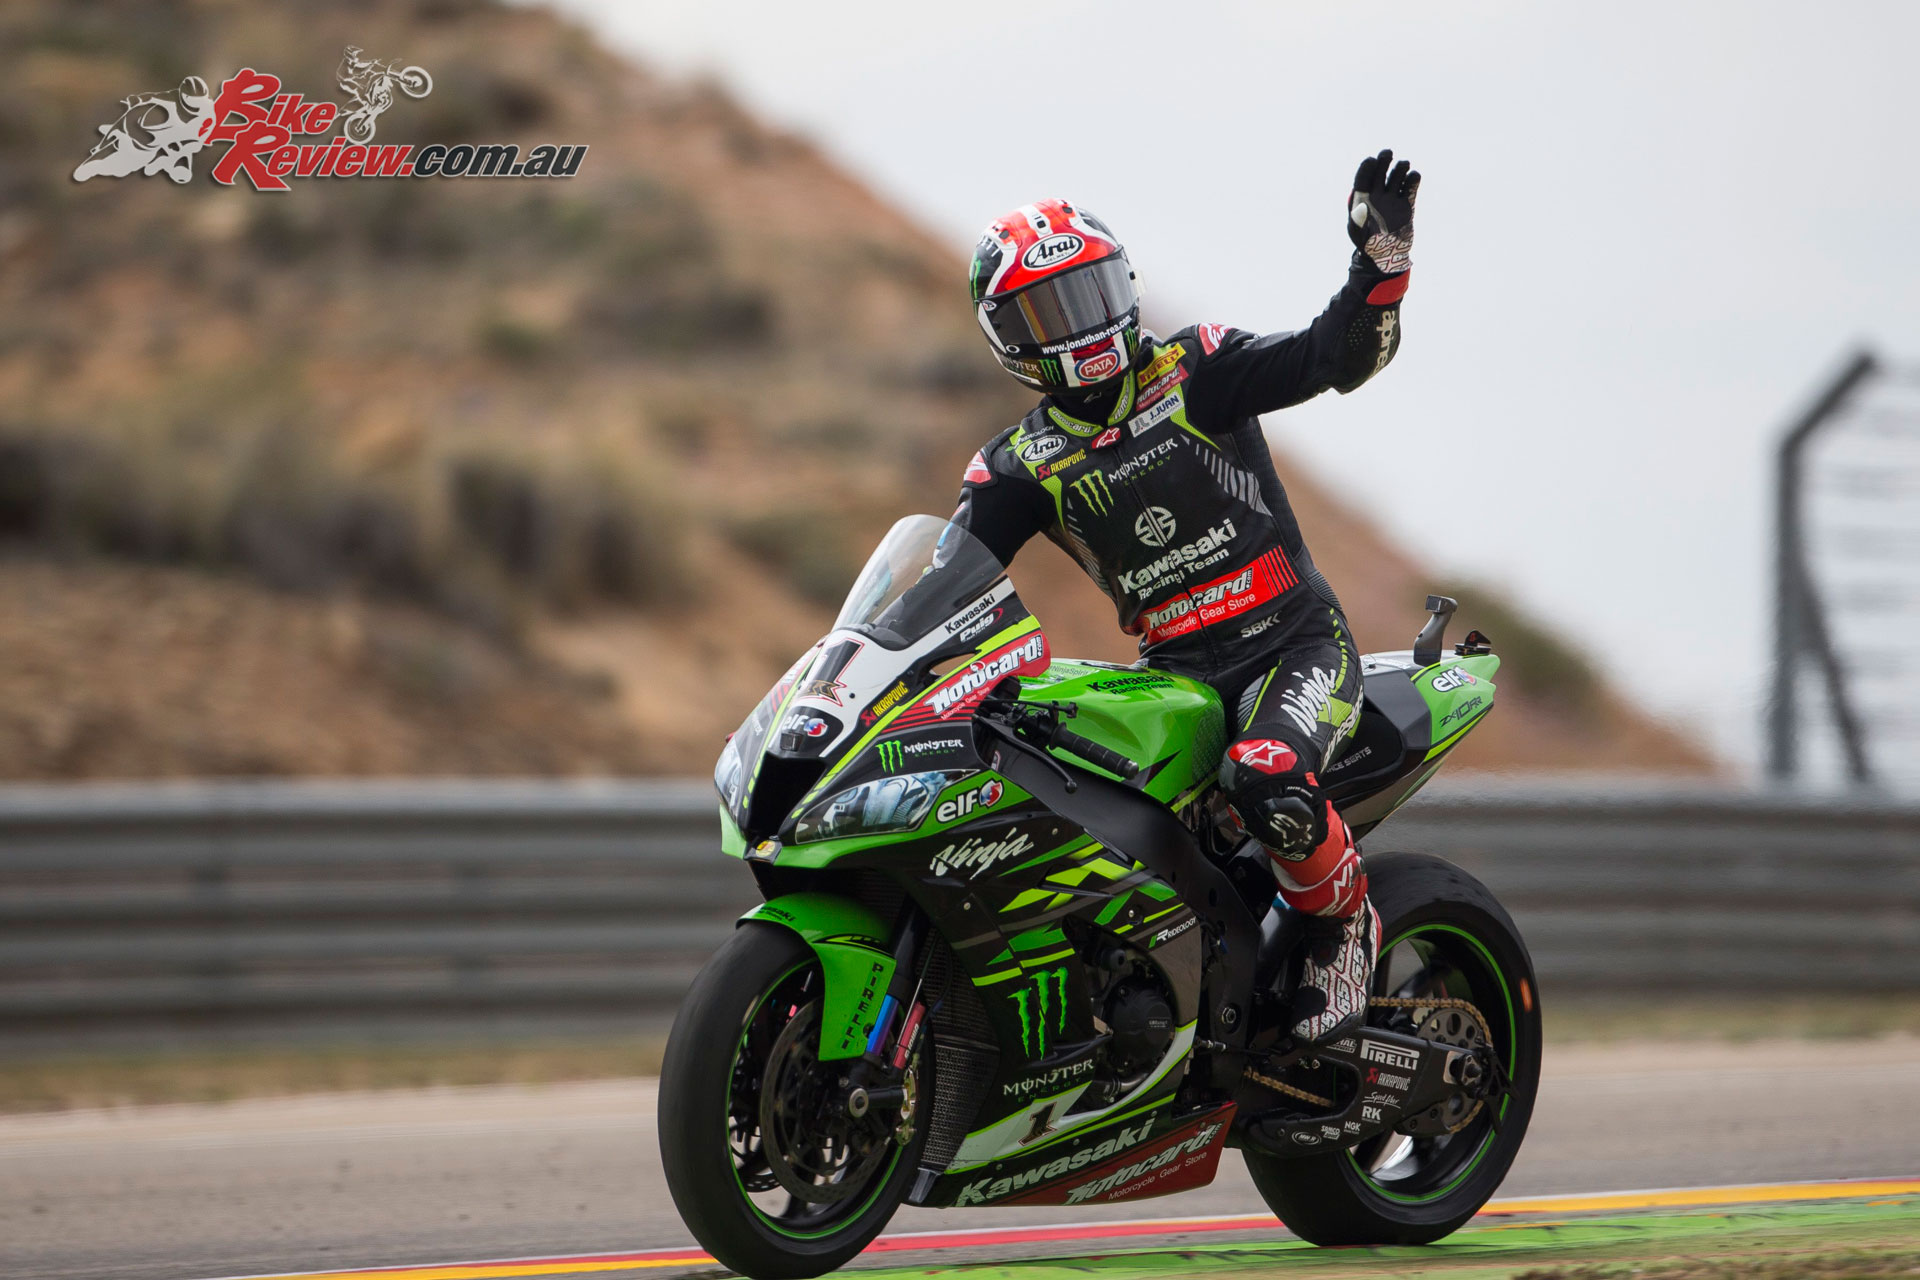 Rea takes the WSBK Race 1 win at Aragon - Image by Geebee Images